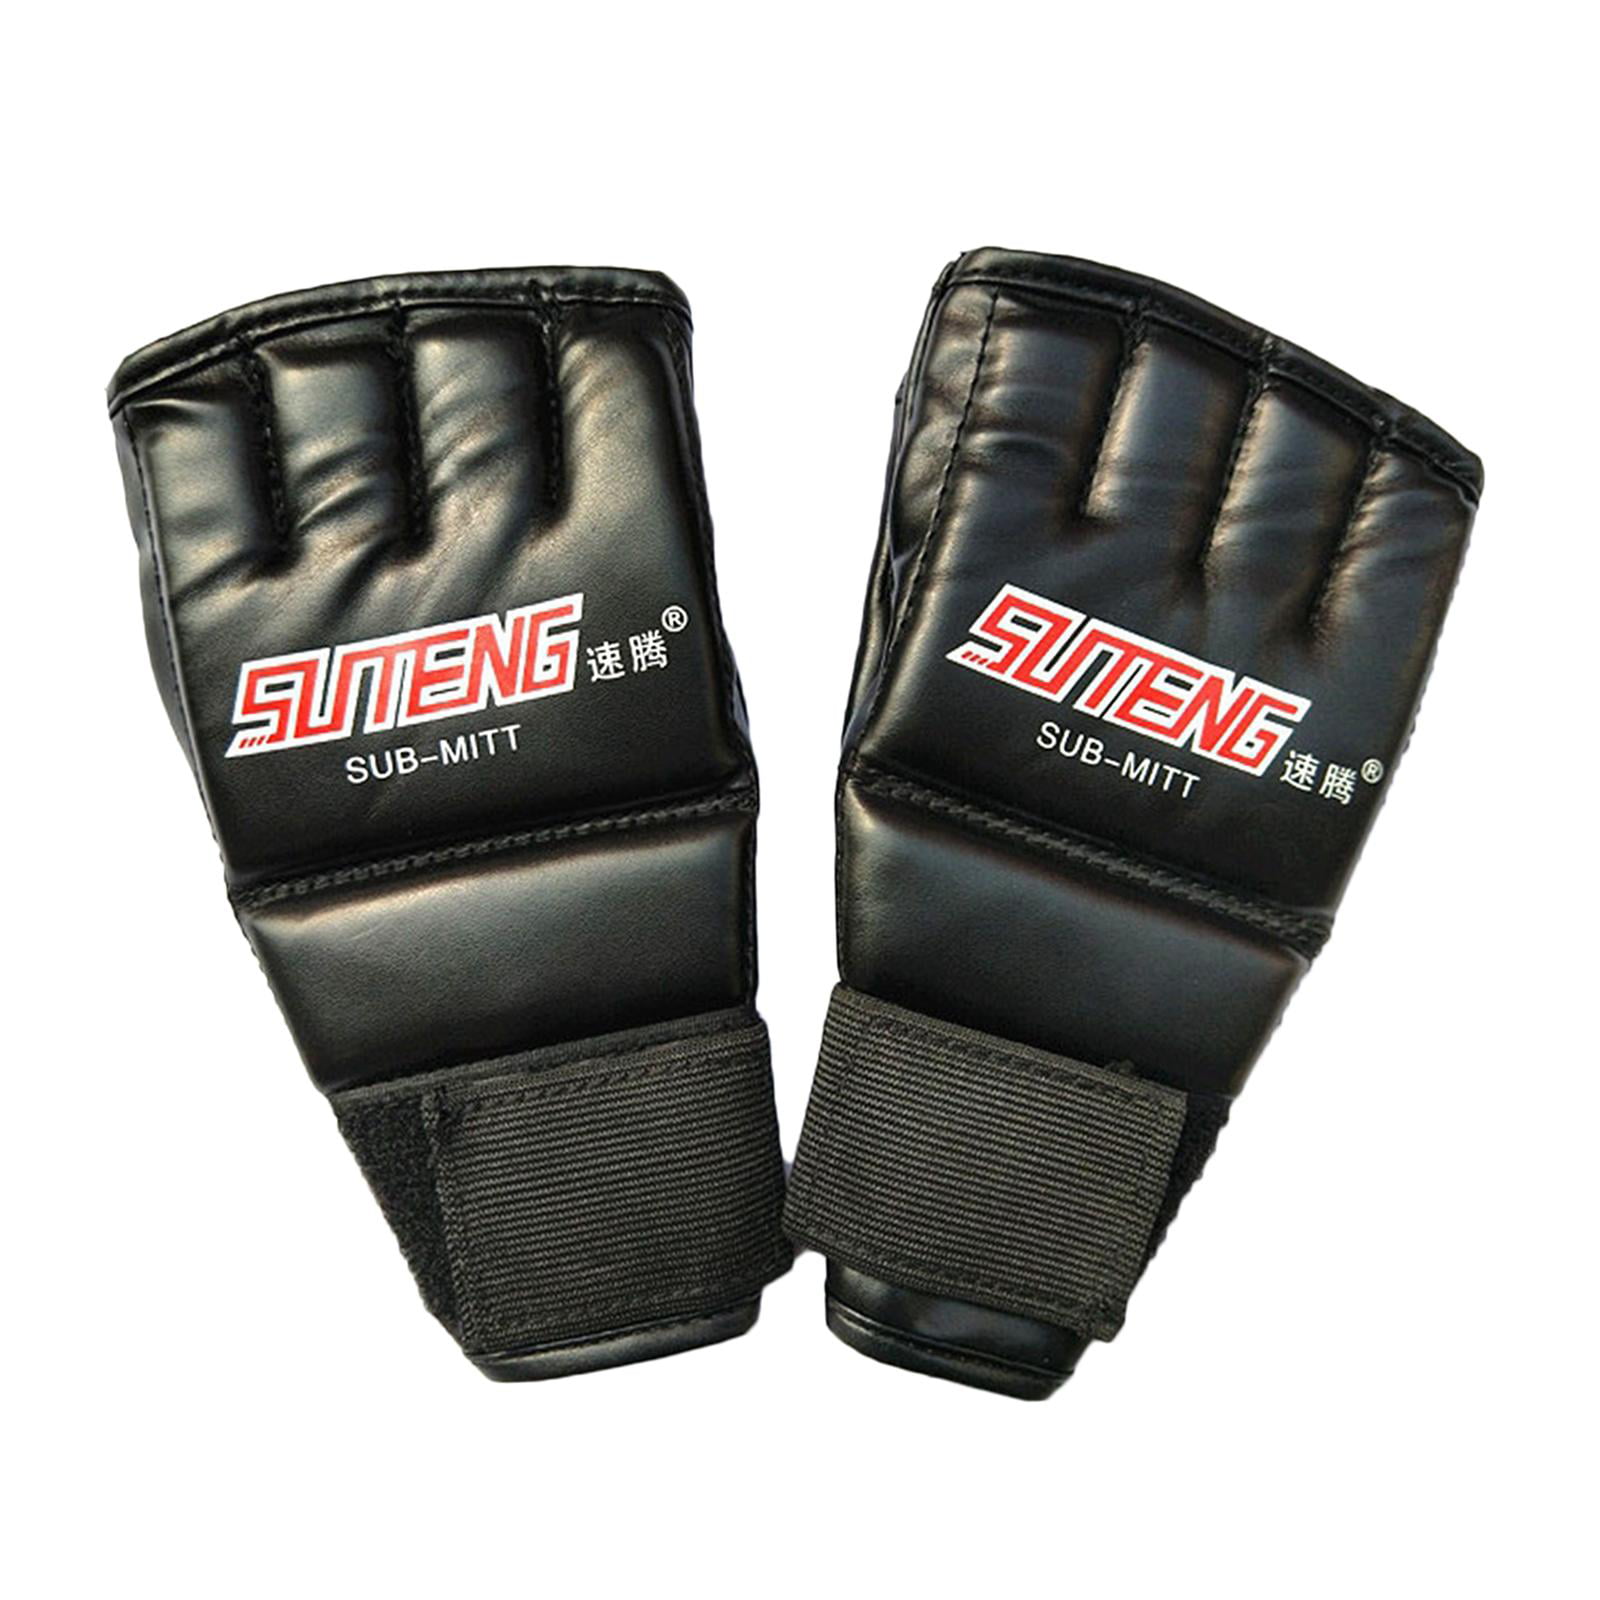 Gym MMA Muay Thai Training Punching Bag Half Mitts Sparring Boxing Gloves 